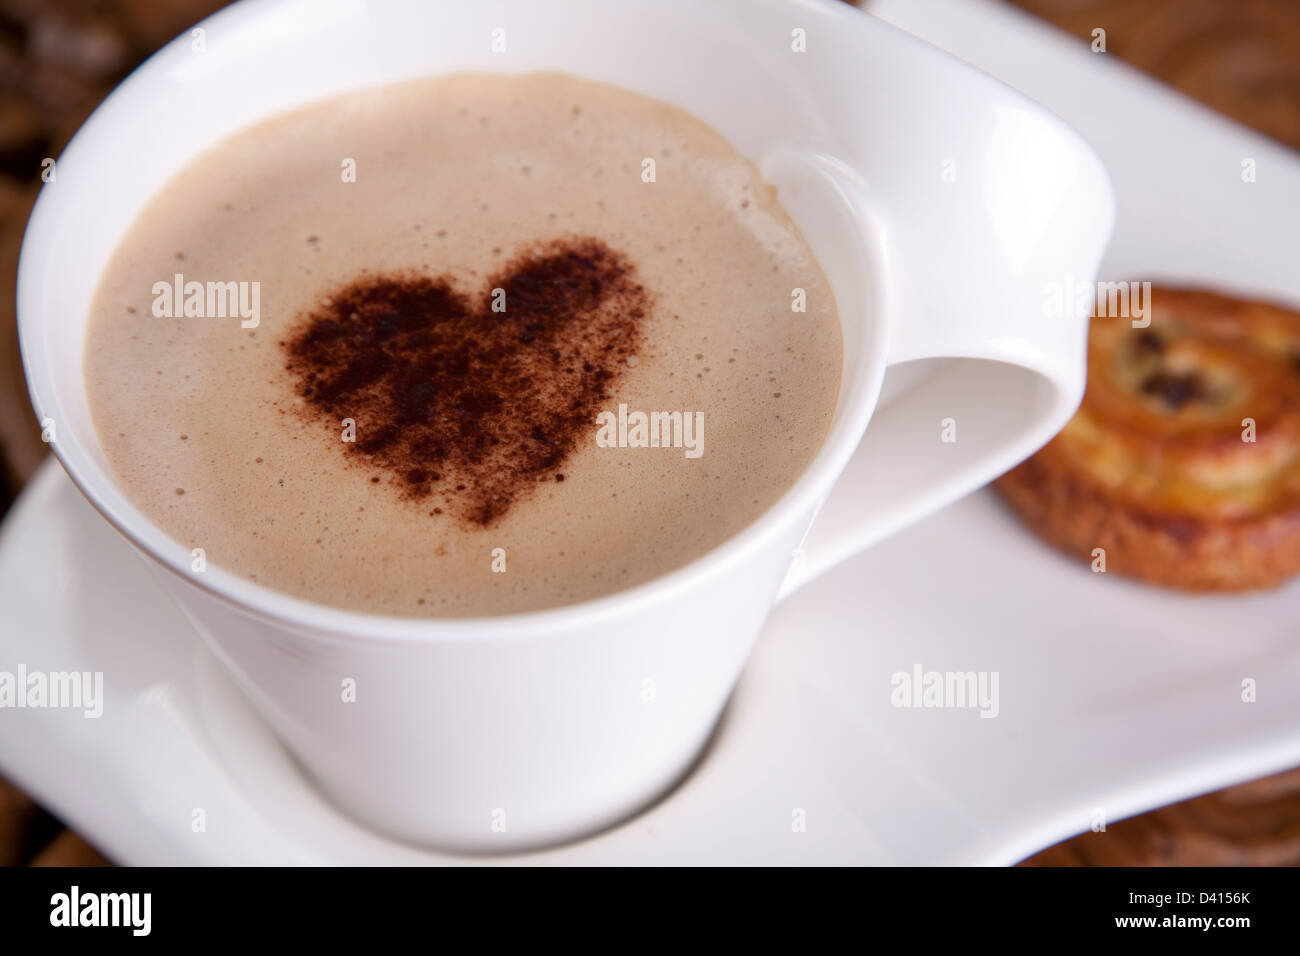 a cup mug of coffee latte with a love heart chocolate sprinkle on top and a danish on the side Stock Photo